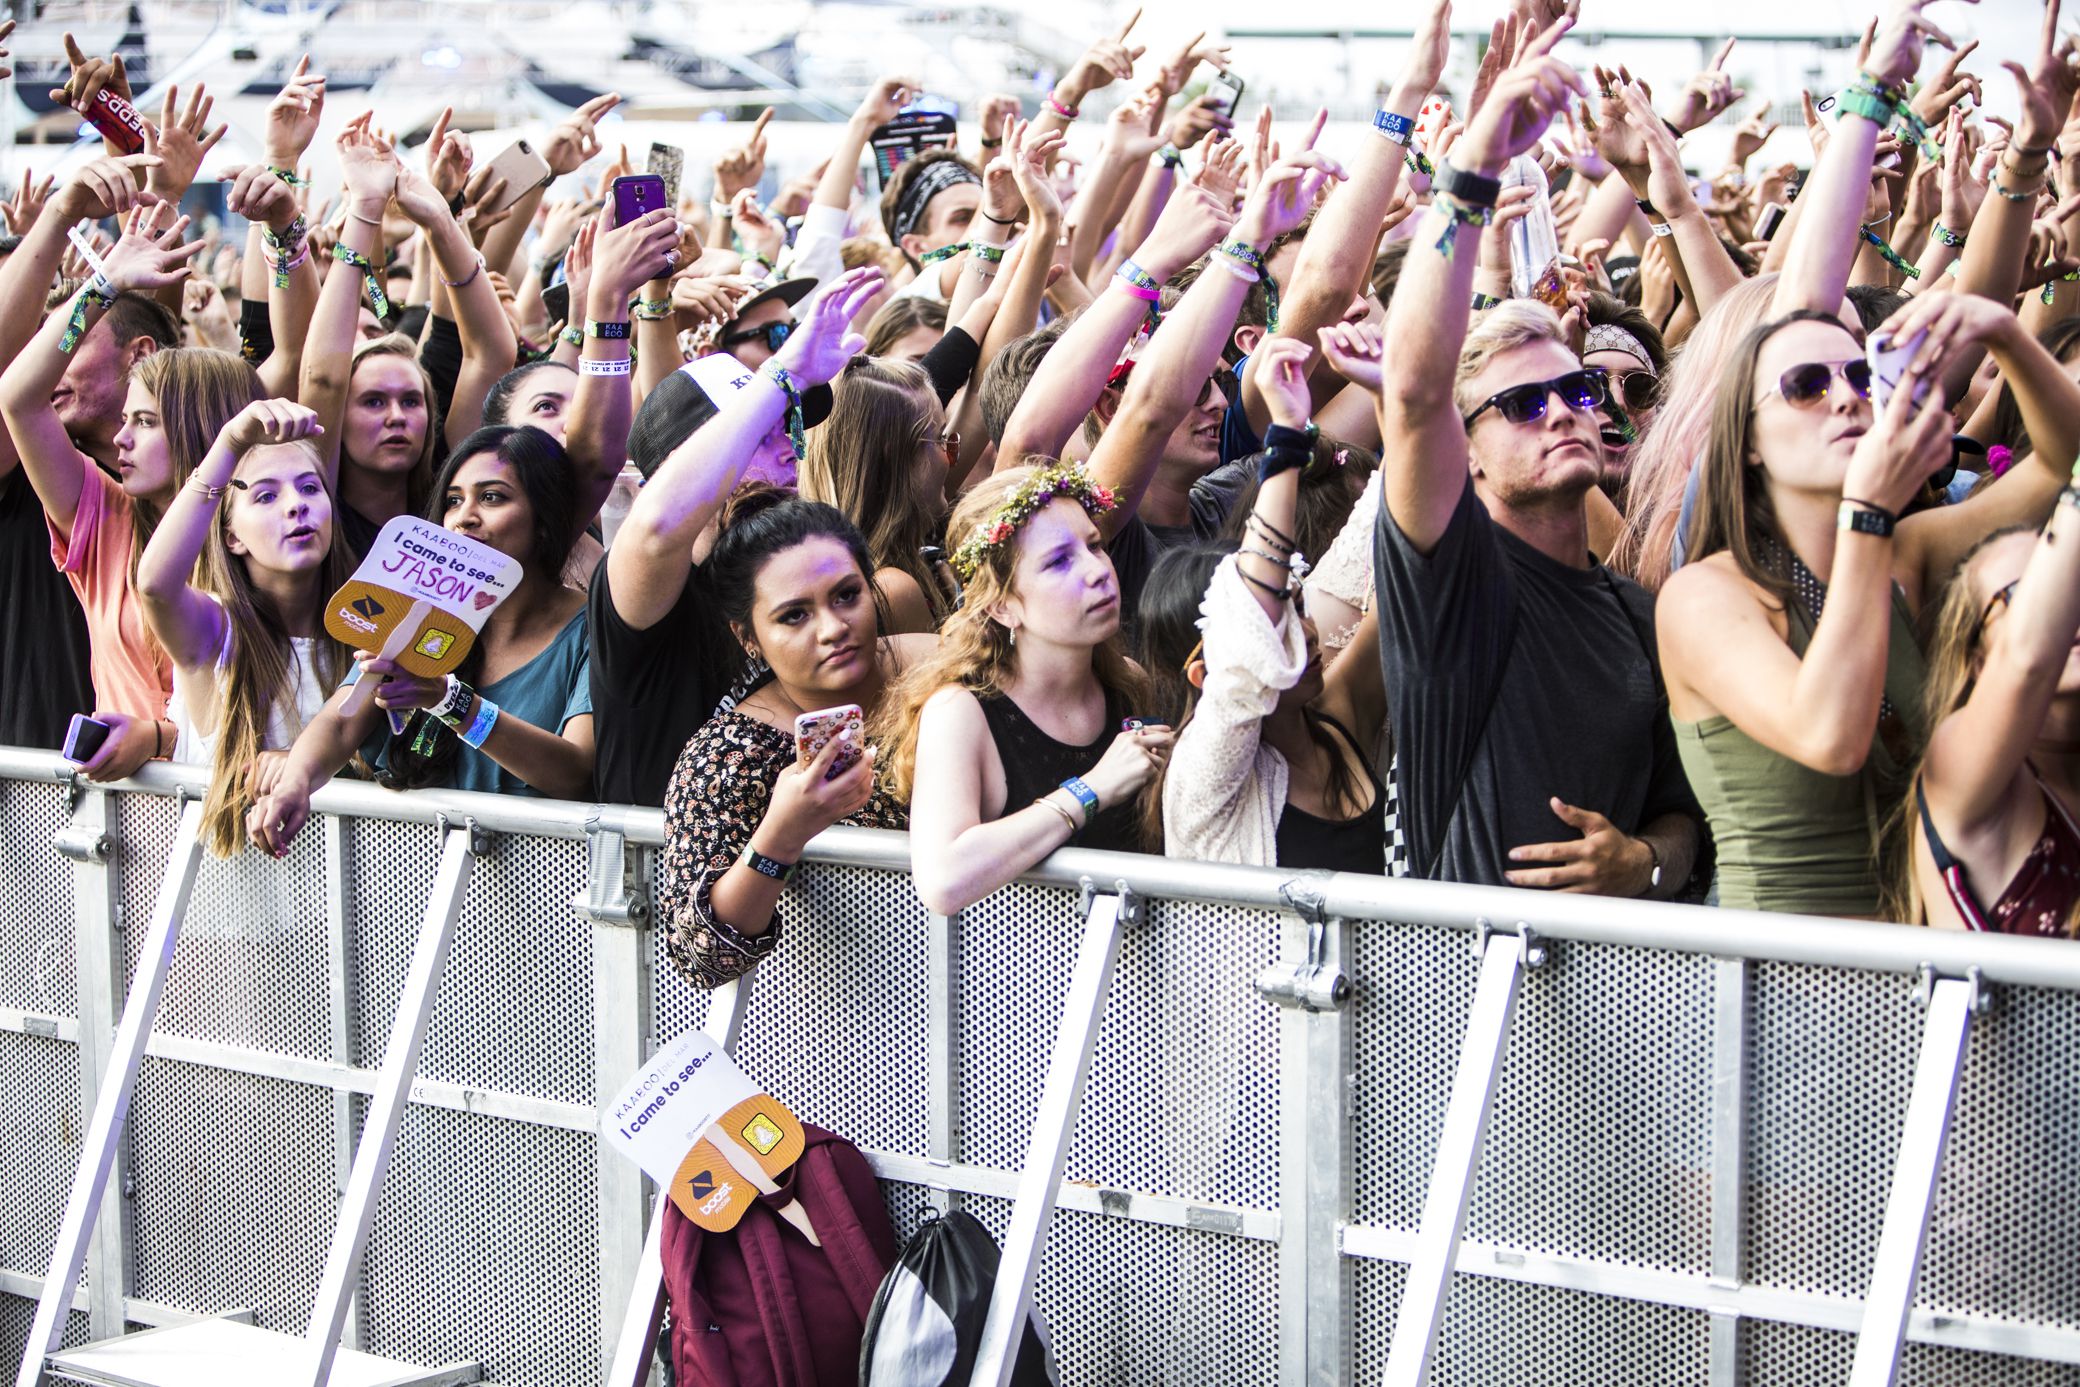 kaaboo 3 4 KAABOO Del Mar Succeeds at Being a Festival for Everyone